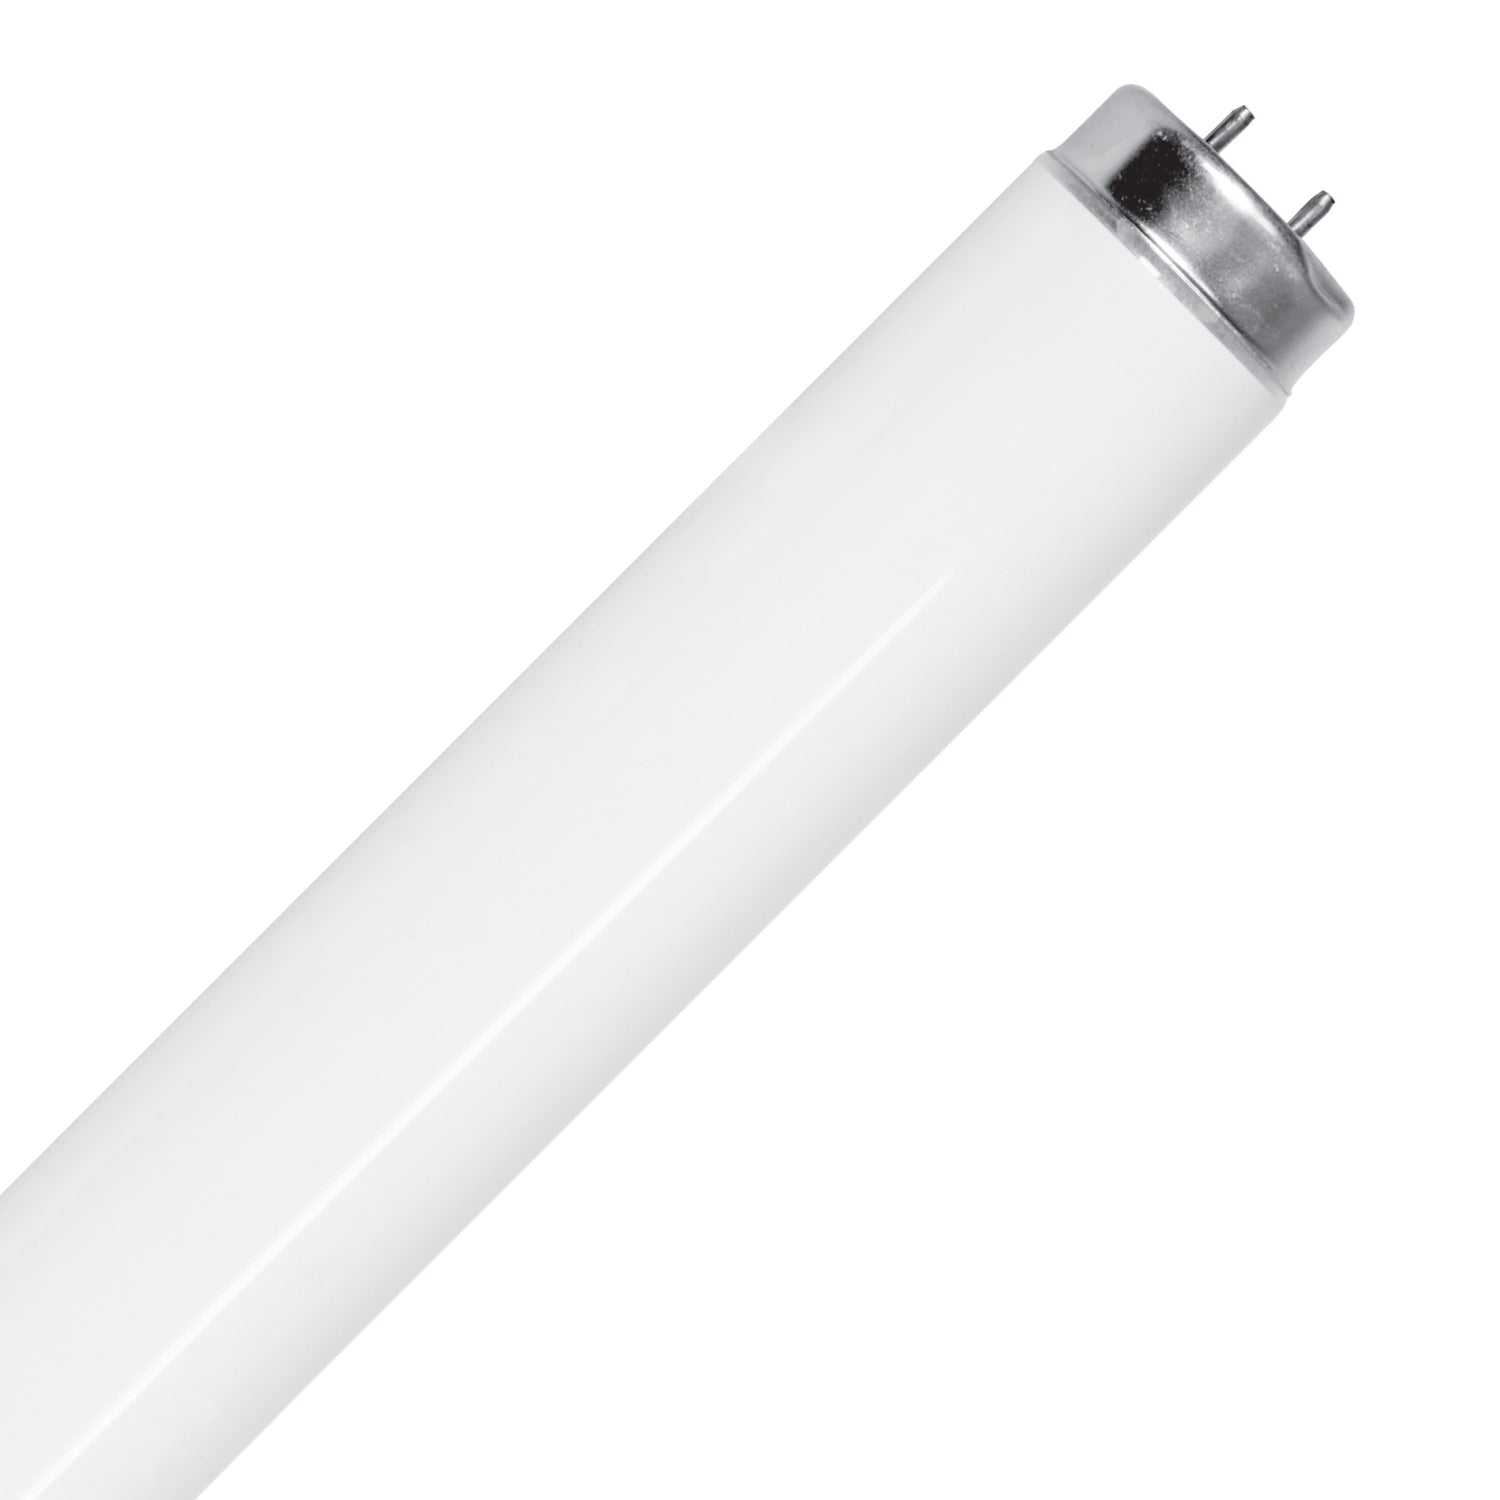 4 ft. 32W Warm White (3000K) G13 Base (T8 Replacement) Fluorescent Linear Light Tube (2-Pack)